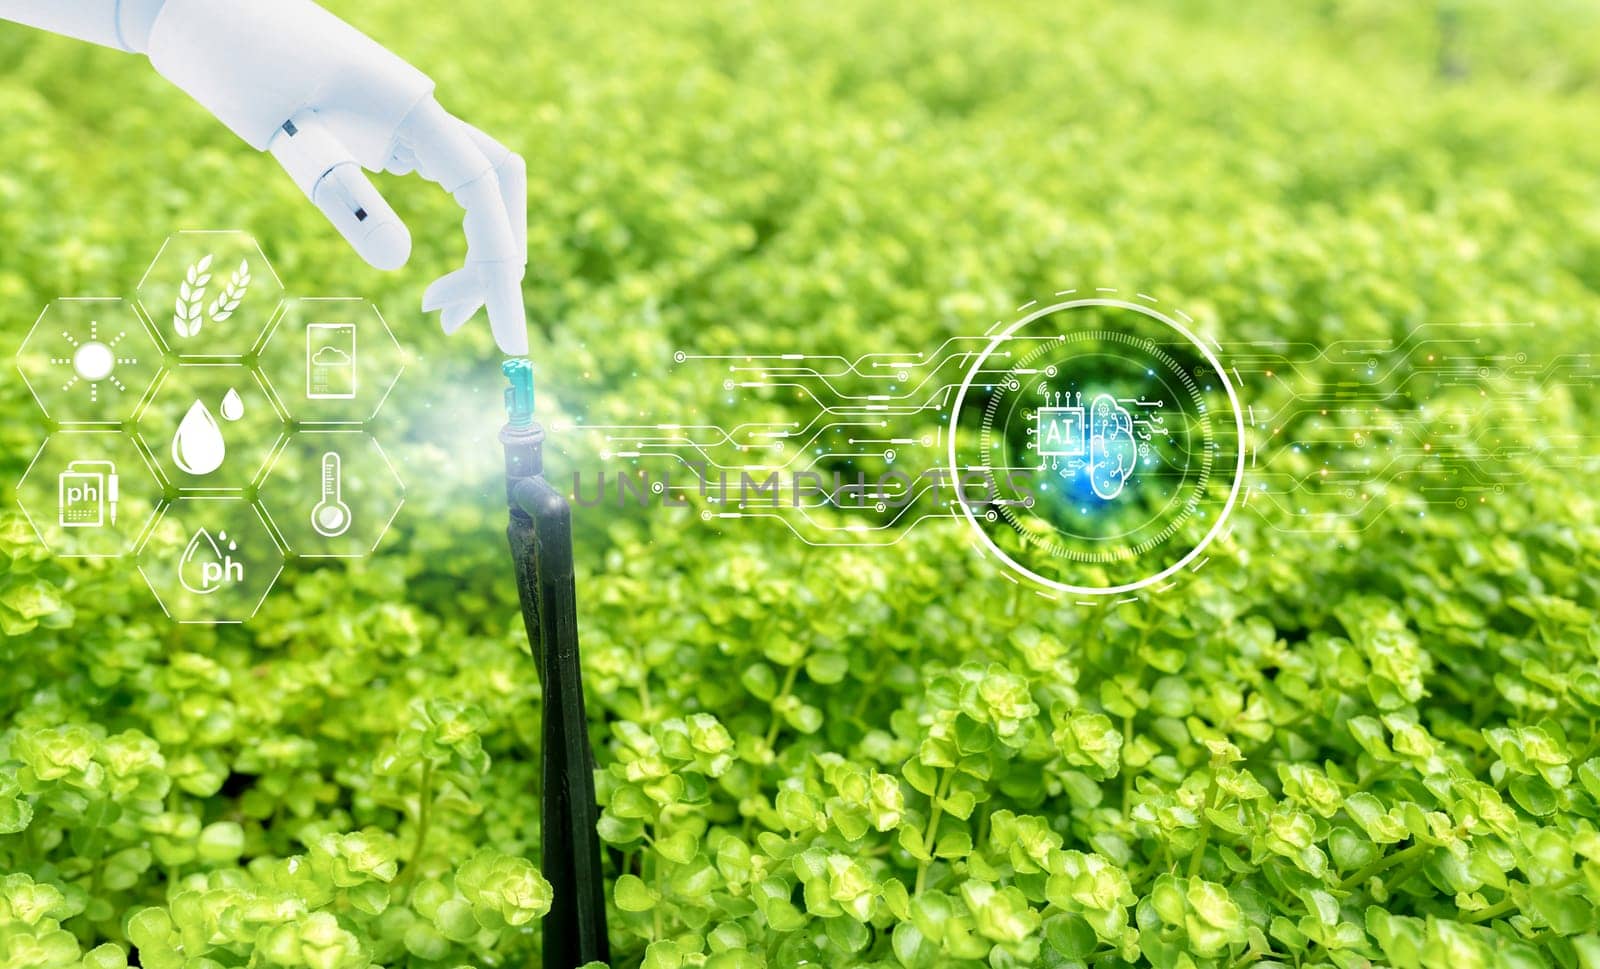 Robot hand touch automatic lawn sprinkler and icon of smart farming concept. Smart agriculture with modern technology concept. Sustainable agriculture. Precision agriculture. Climate monitoring. by Fahroni